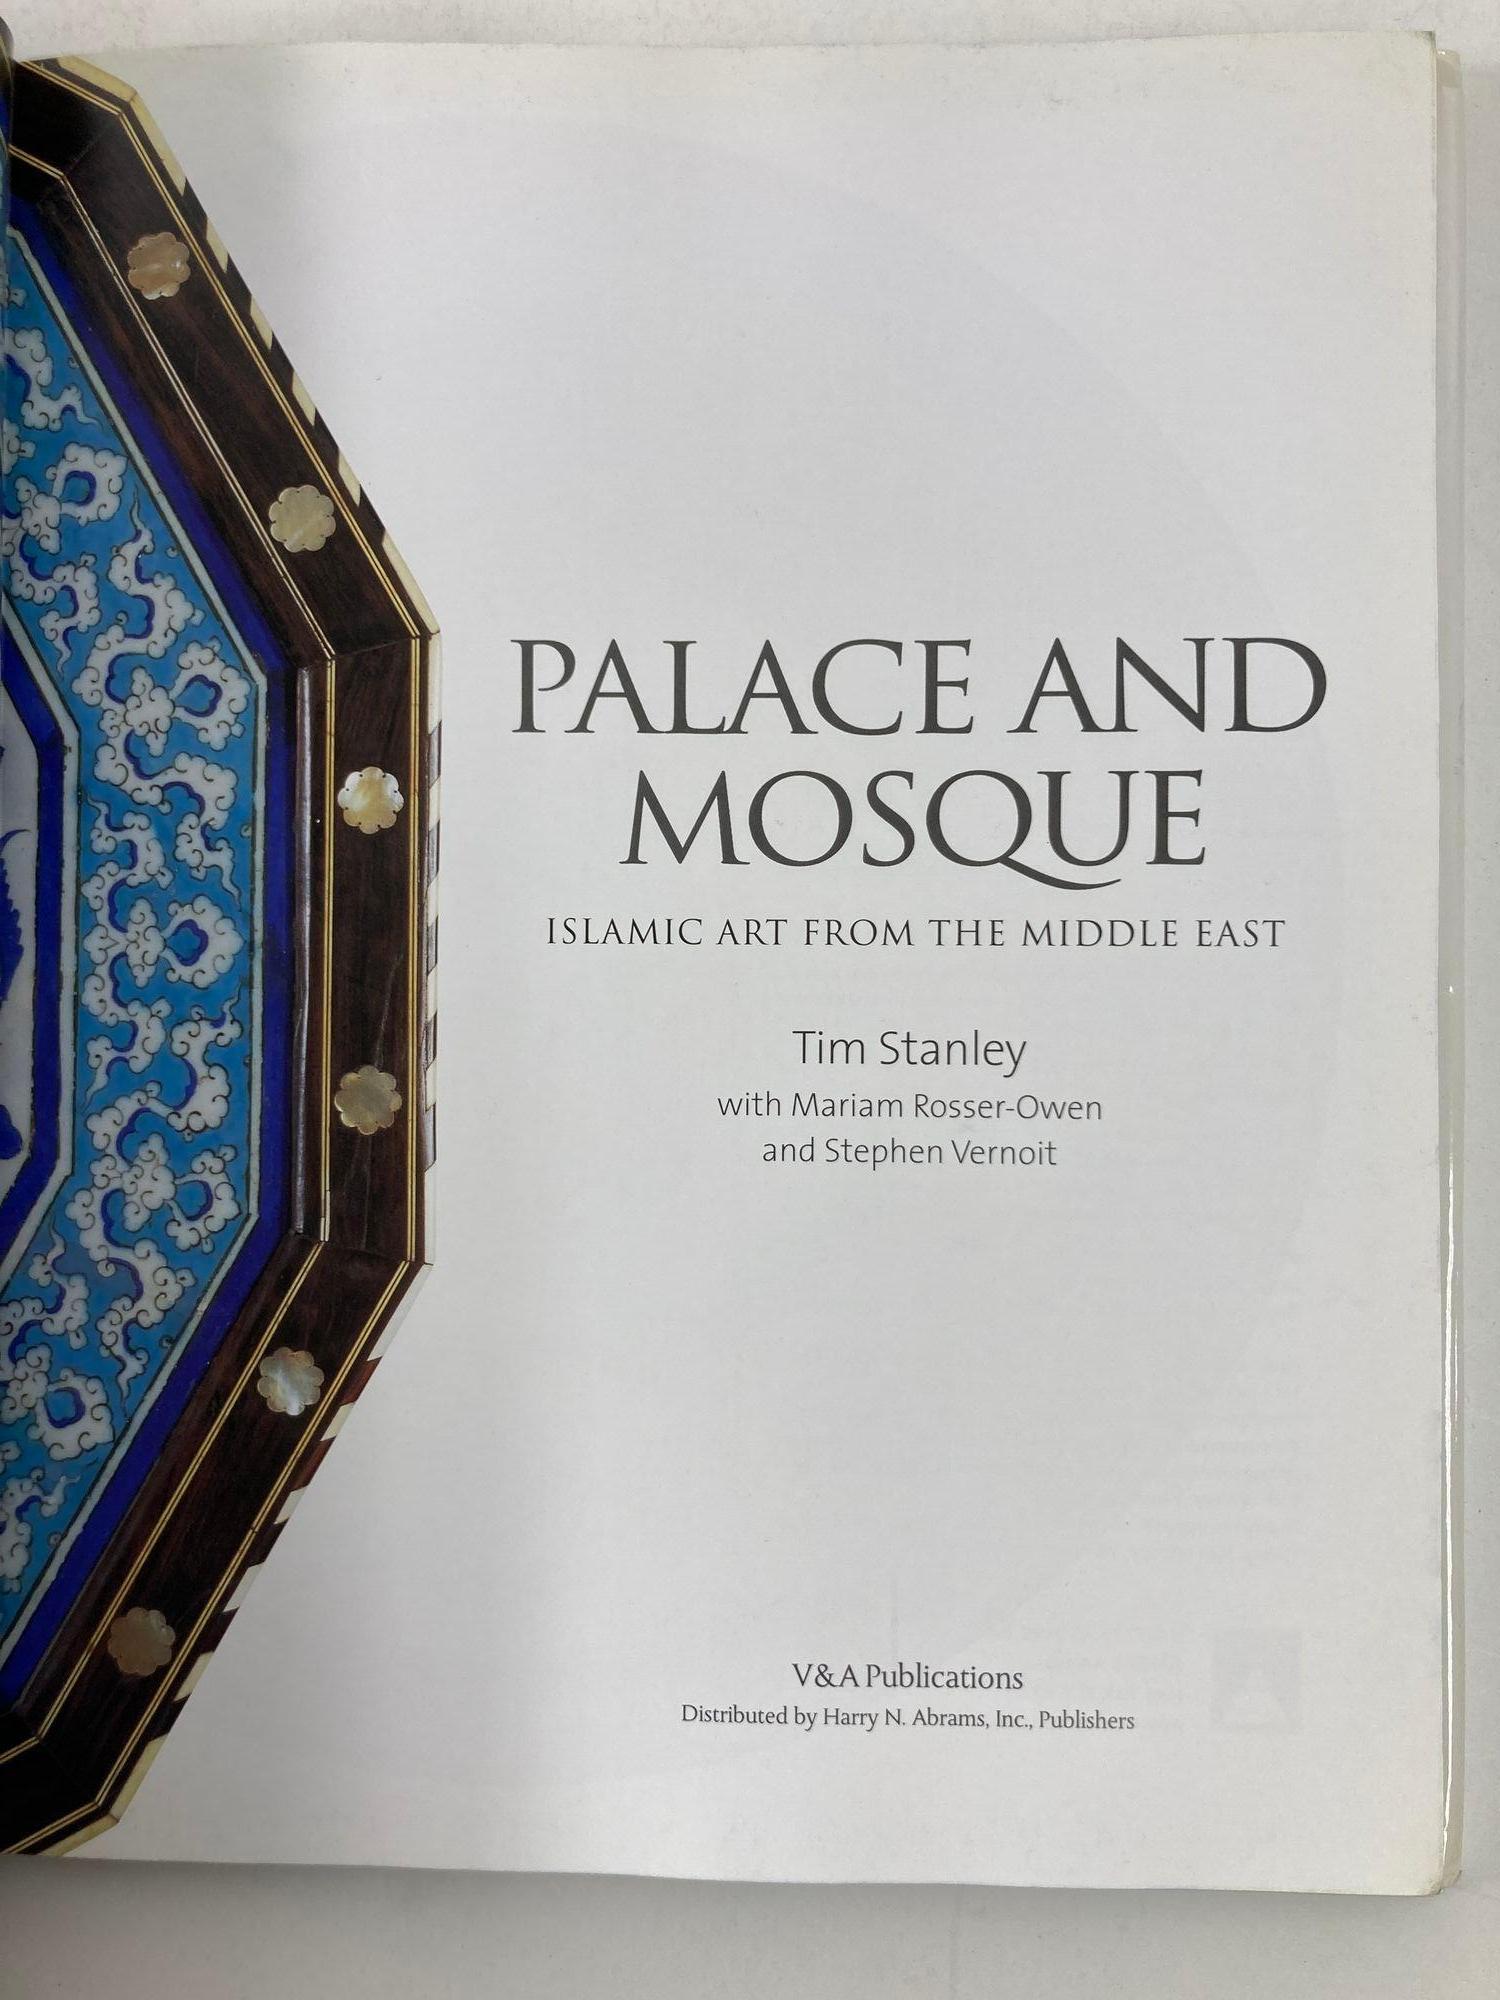 Contemporary Palace and Mosque : Islamic Art from the Middle East Book by Tim Stanley For Sale